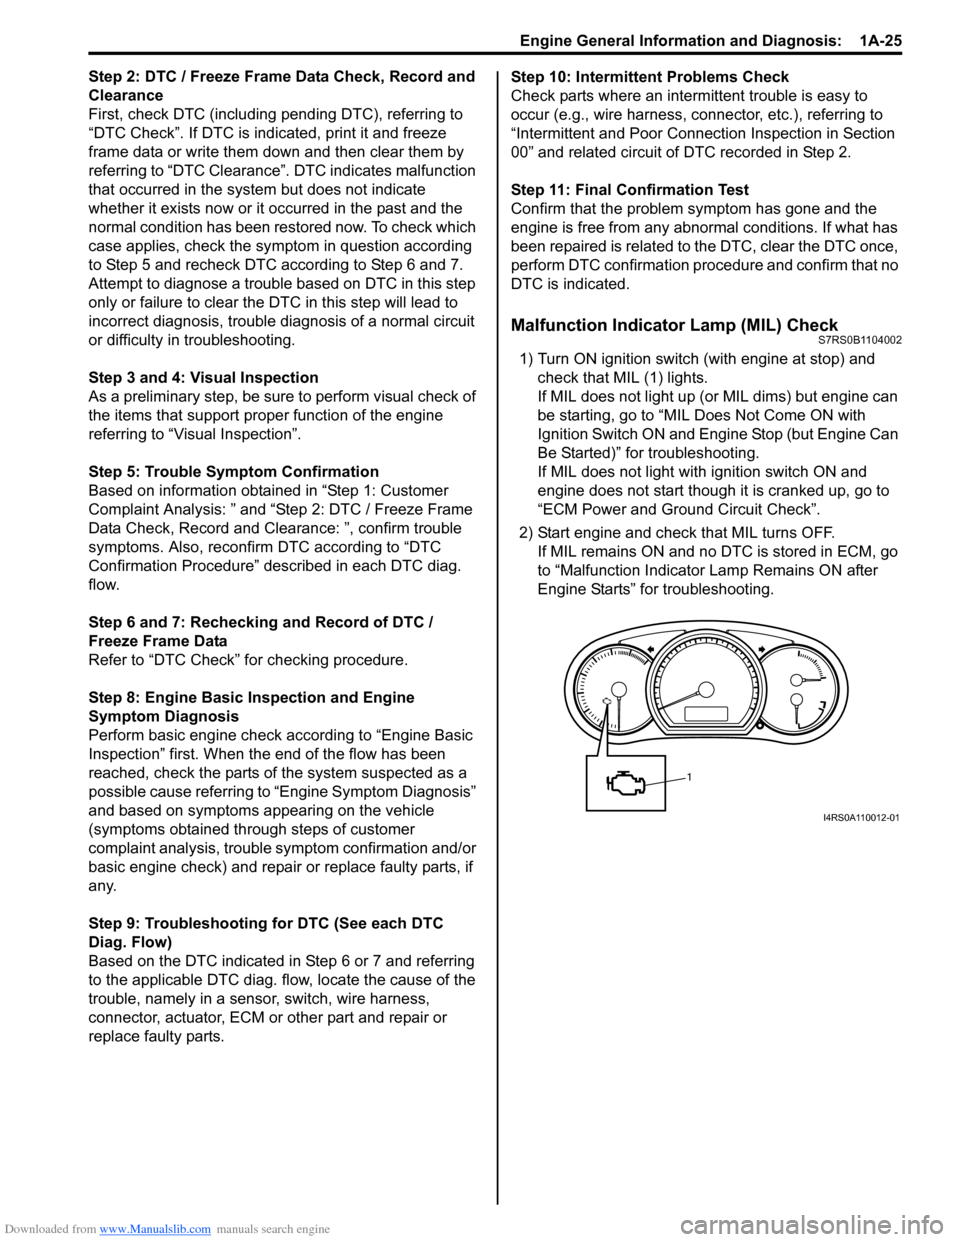 SUZUKI SWIFT 2007 2.G Service Workshop Manual Downloaded from www.Manualslib.com manuals search engine Engine General Information and Diagnosis:  1A-25
Step 2: DTC / Freeze Frame Data Check, Record and 
Clearance
First, check DTC (including pendi